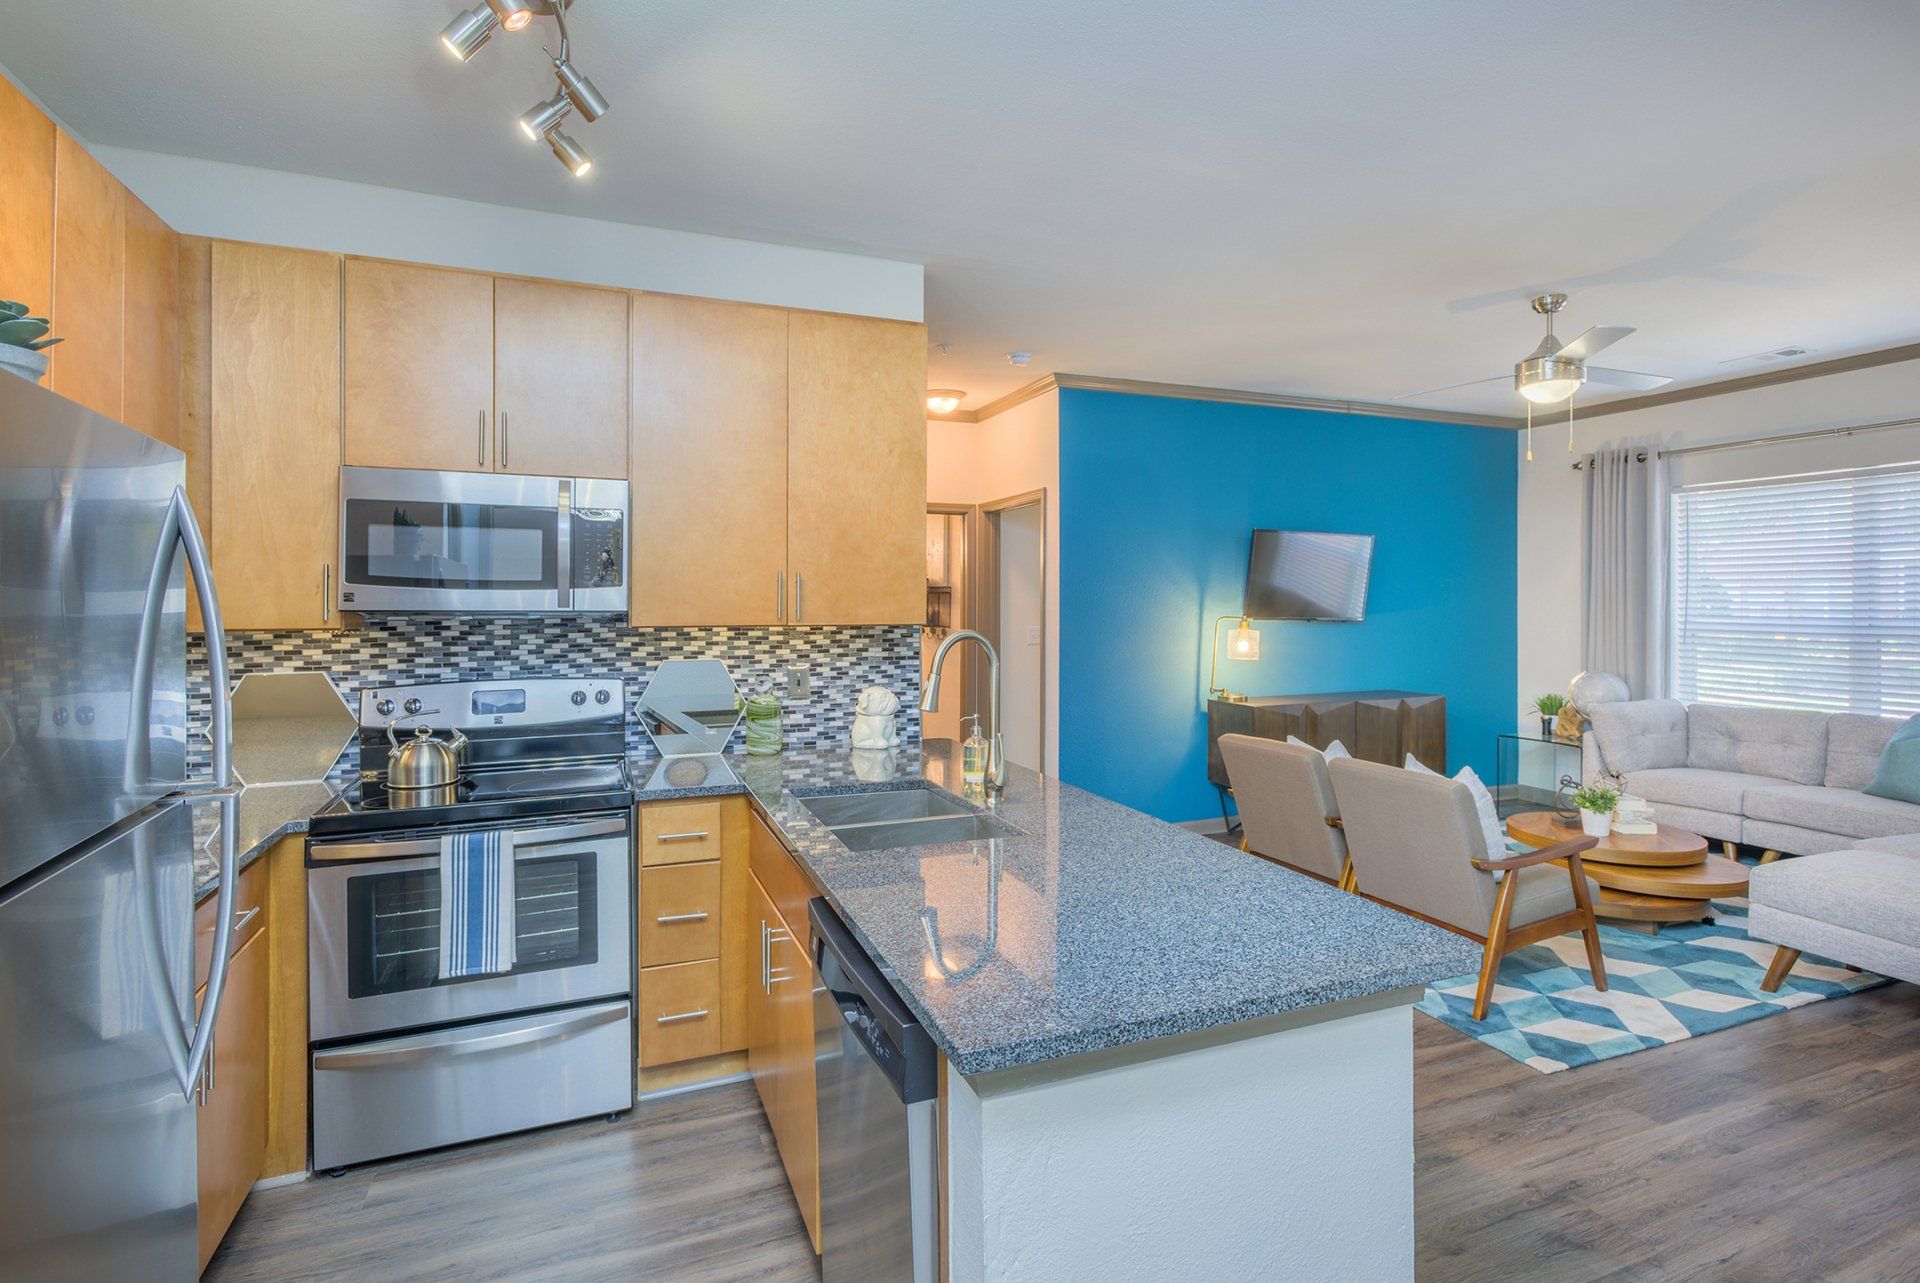 Kitchen with Stainless Steel Appliances | Presley Oaks